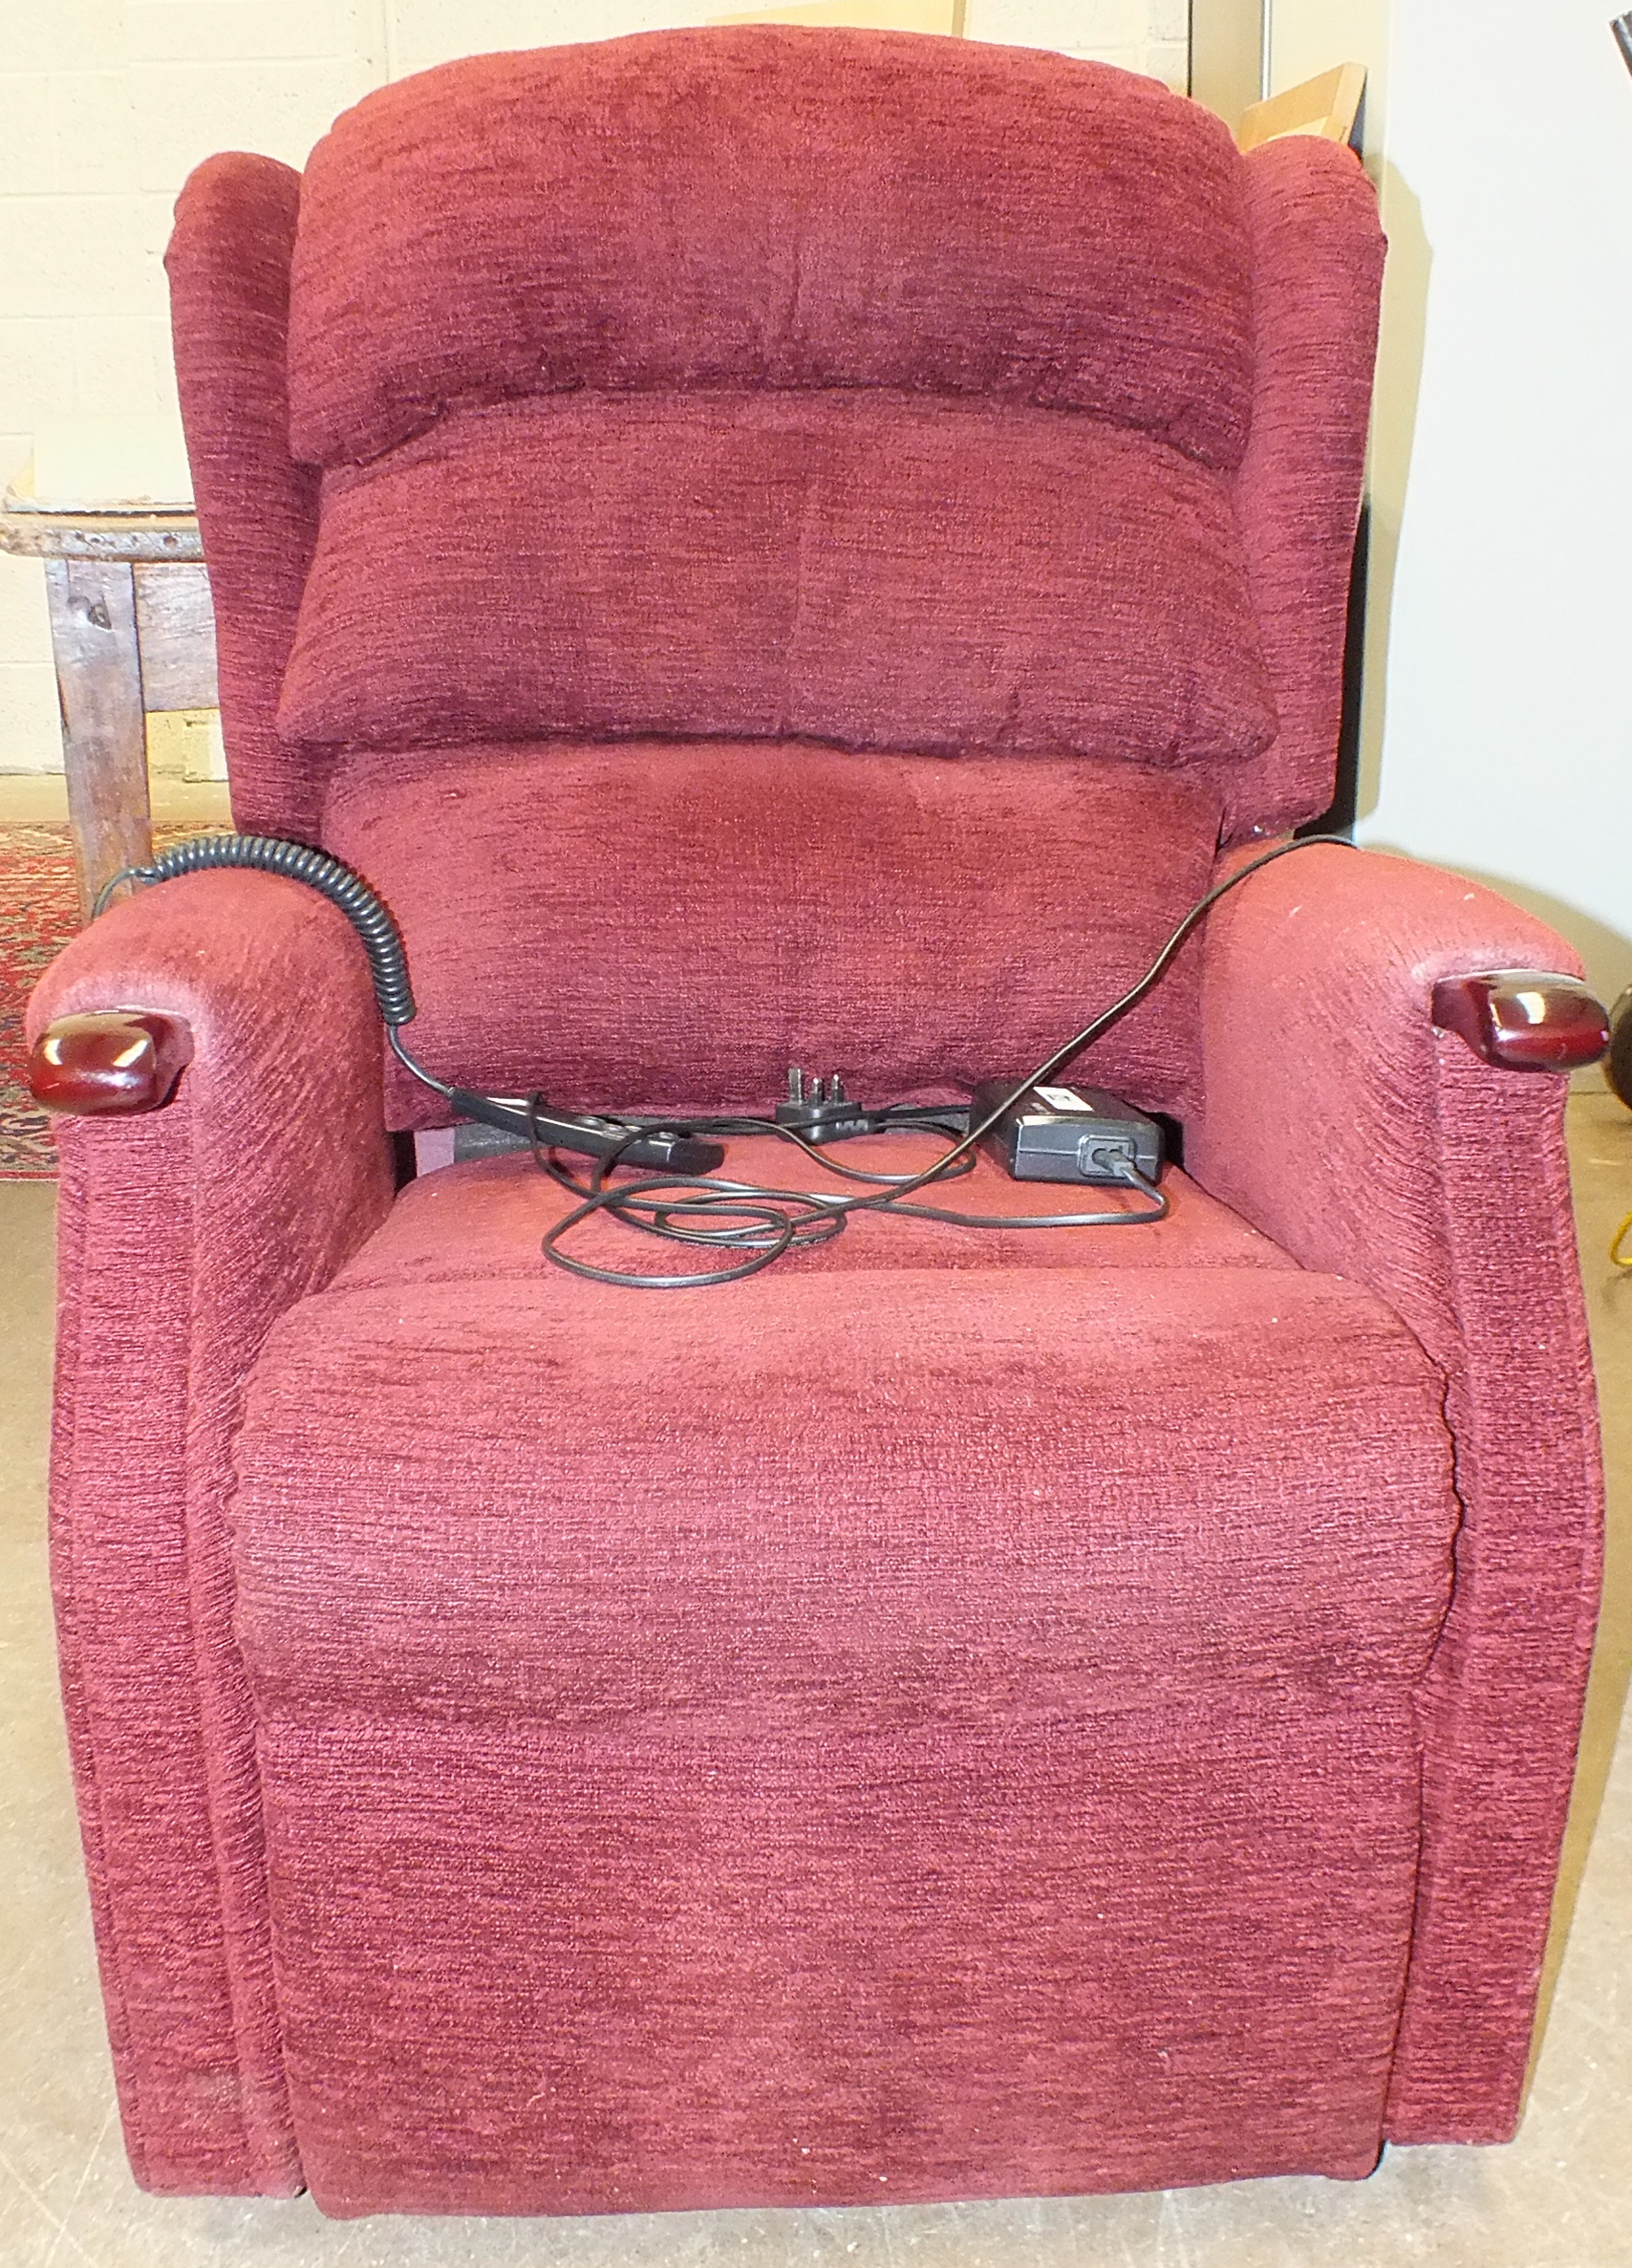 An HSL orthopaedic dual riser-recliner chair with T-motion remote control.